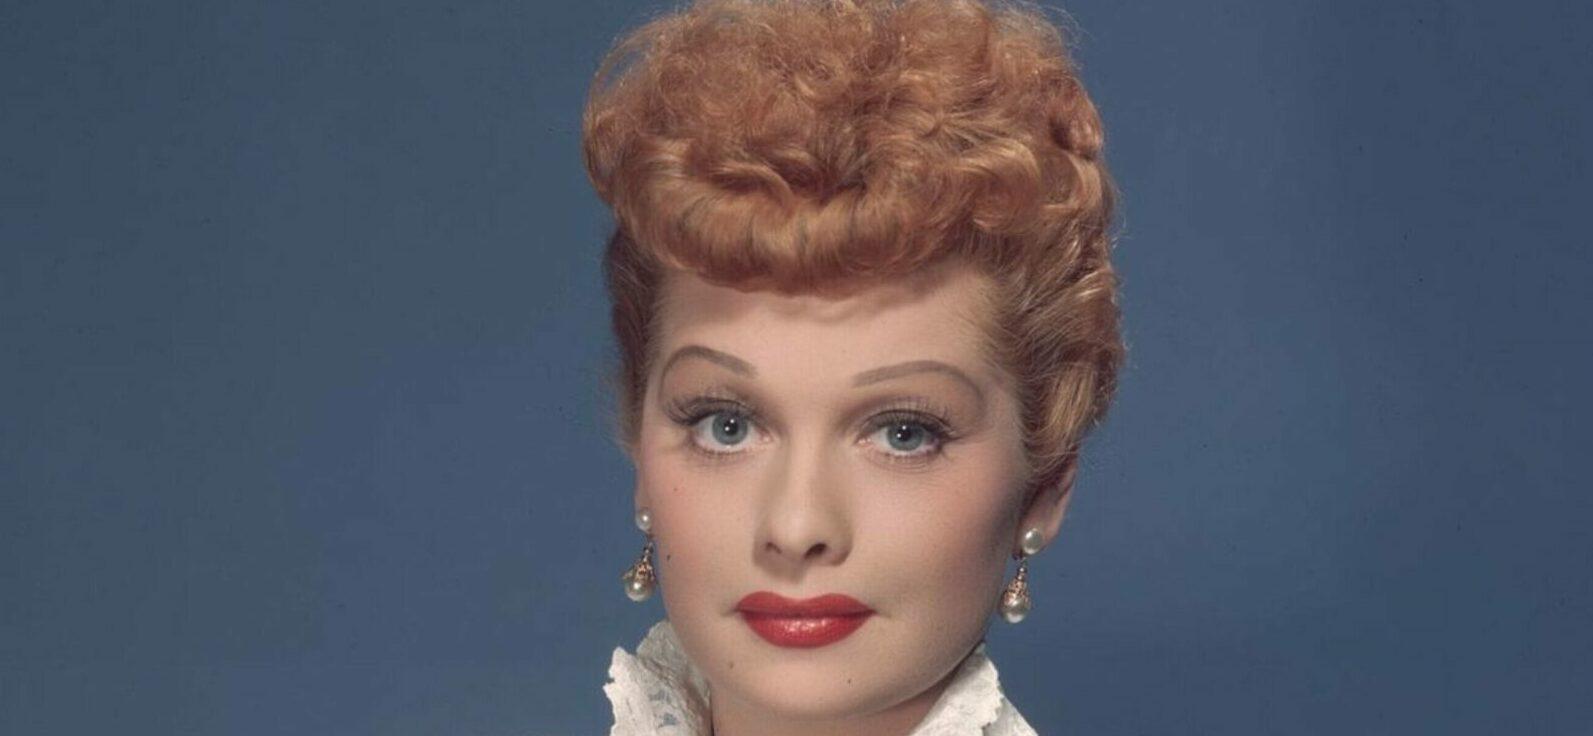 A photo showing Lucille Ball in a white net jacket and black dress.